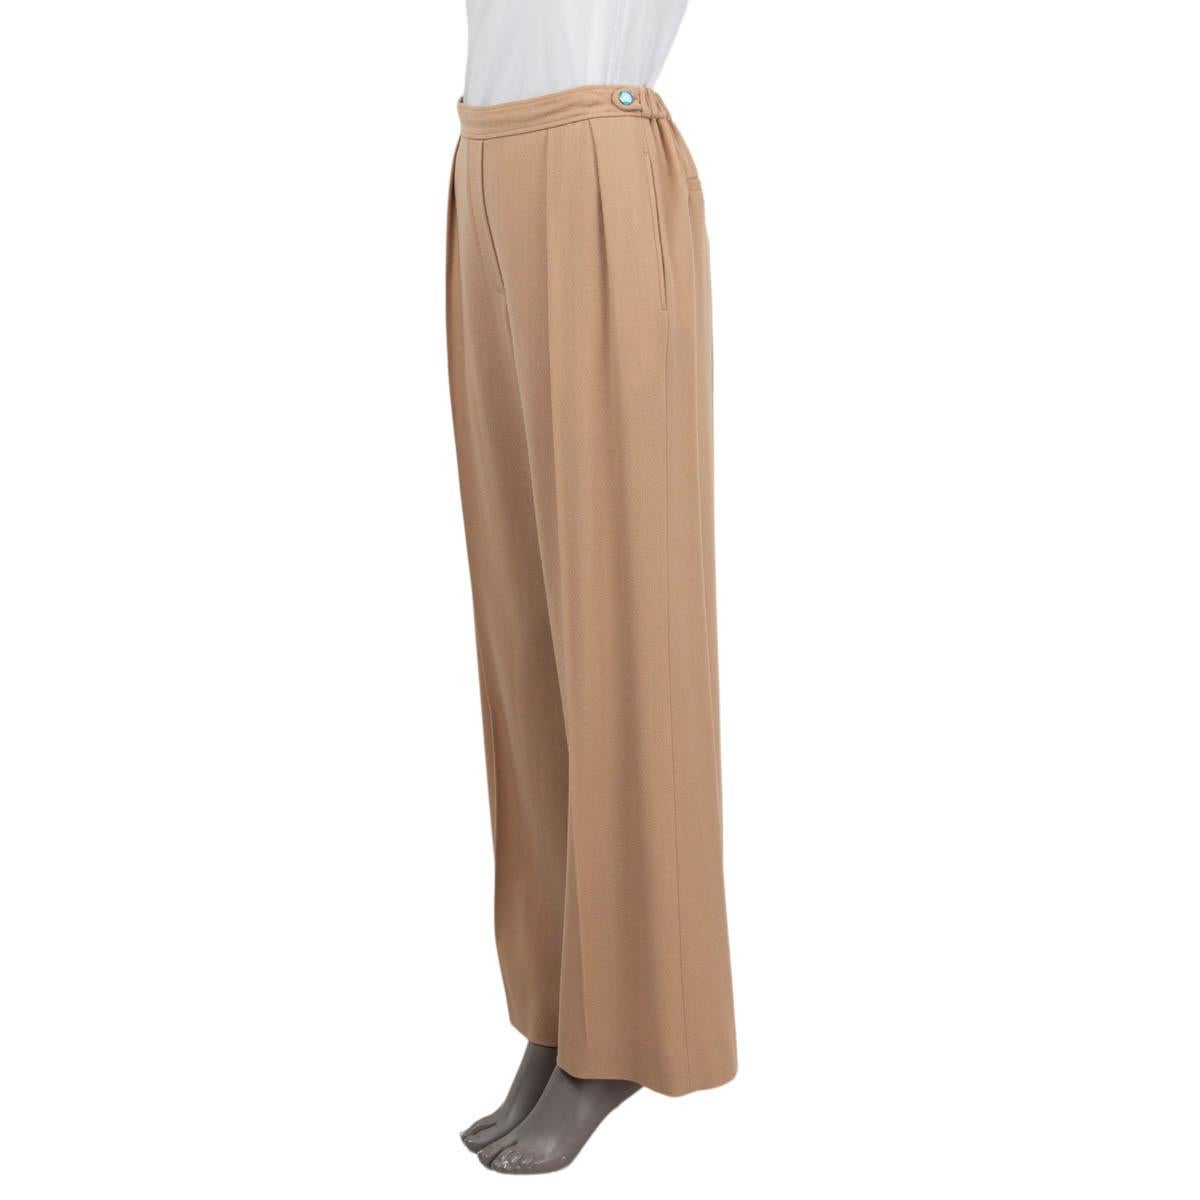 100% authentic Hermès Pre-Fall 2020 'Esprit Pyjama' pleated pants in beige virgin wool (98%), elastane (1%) and polyamide (1%). Feature two side slit pockets and two sewn shut slit pockets at the back. Have an elastic waistband and two faux